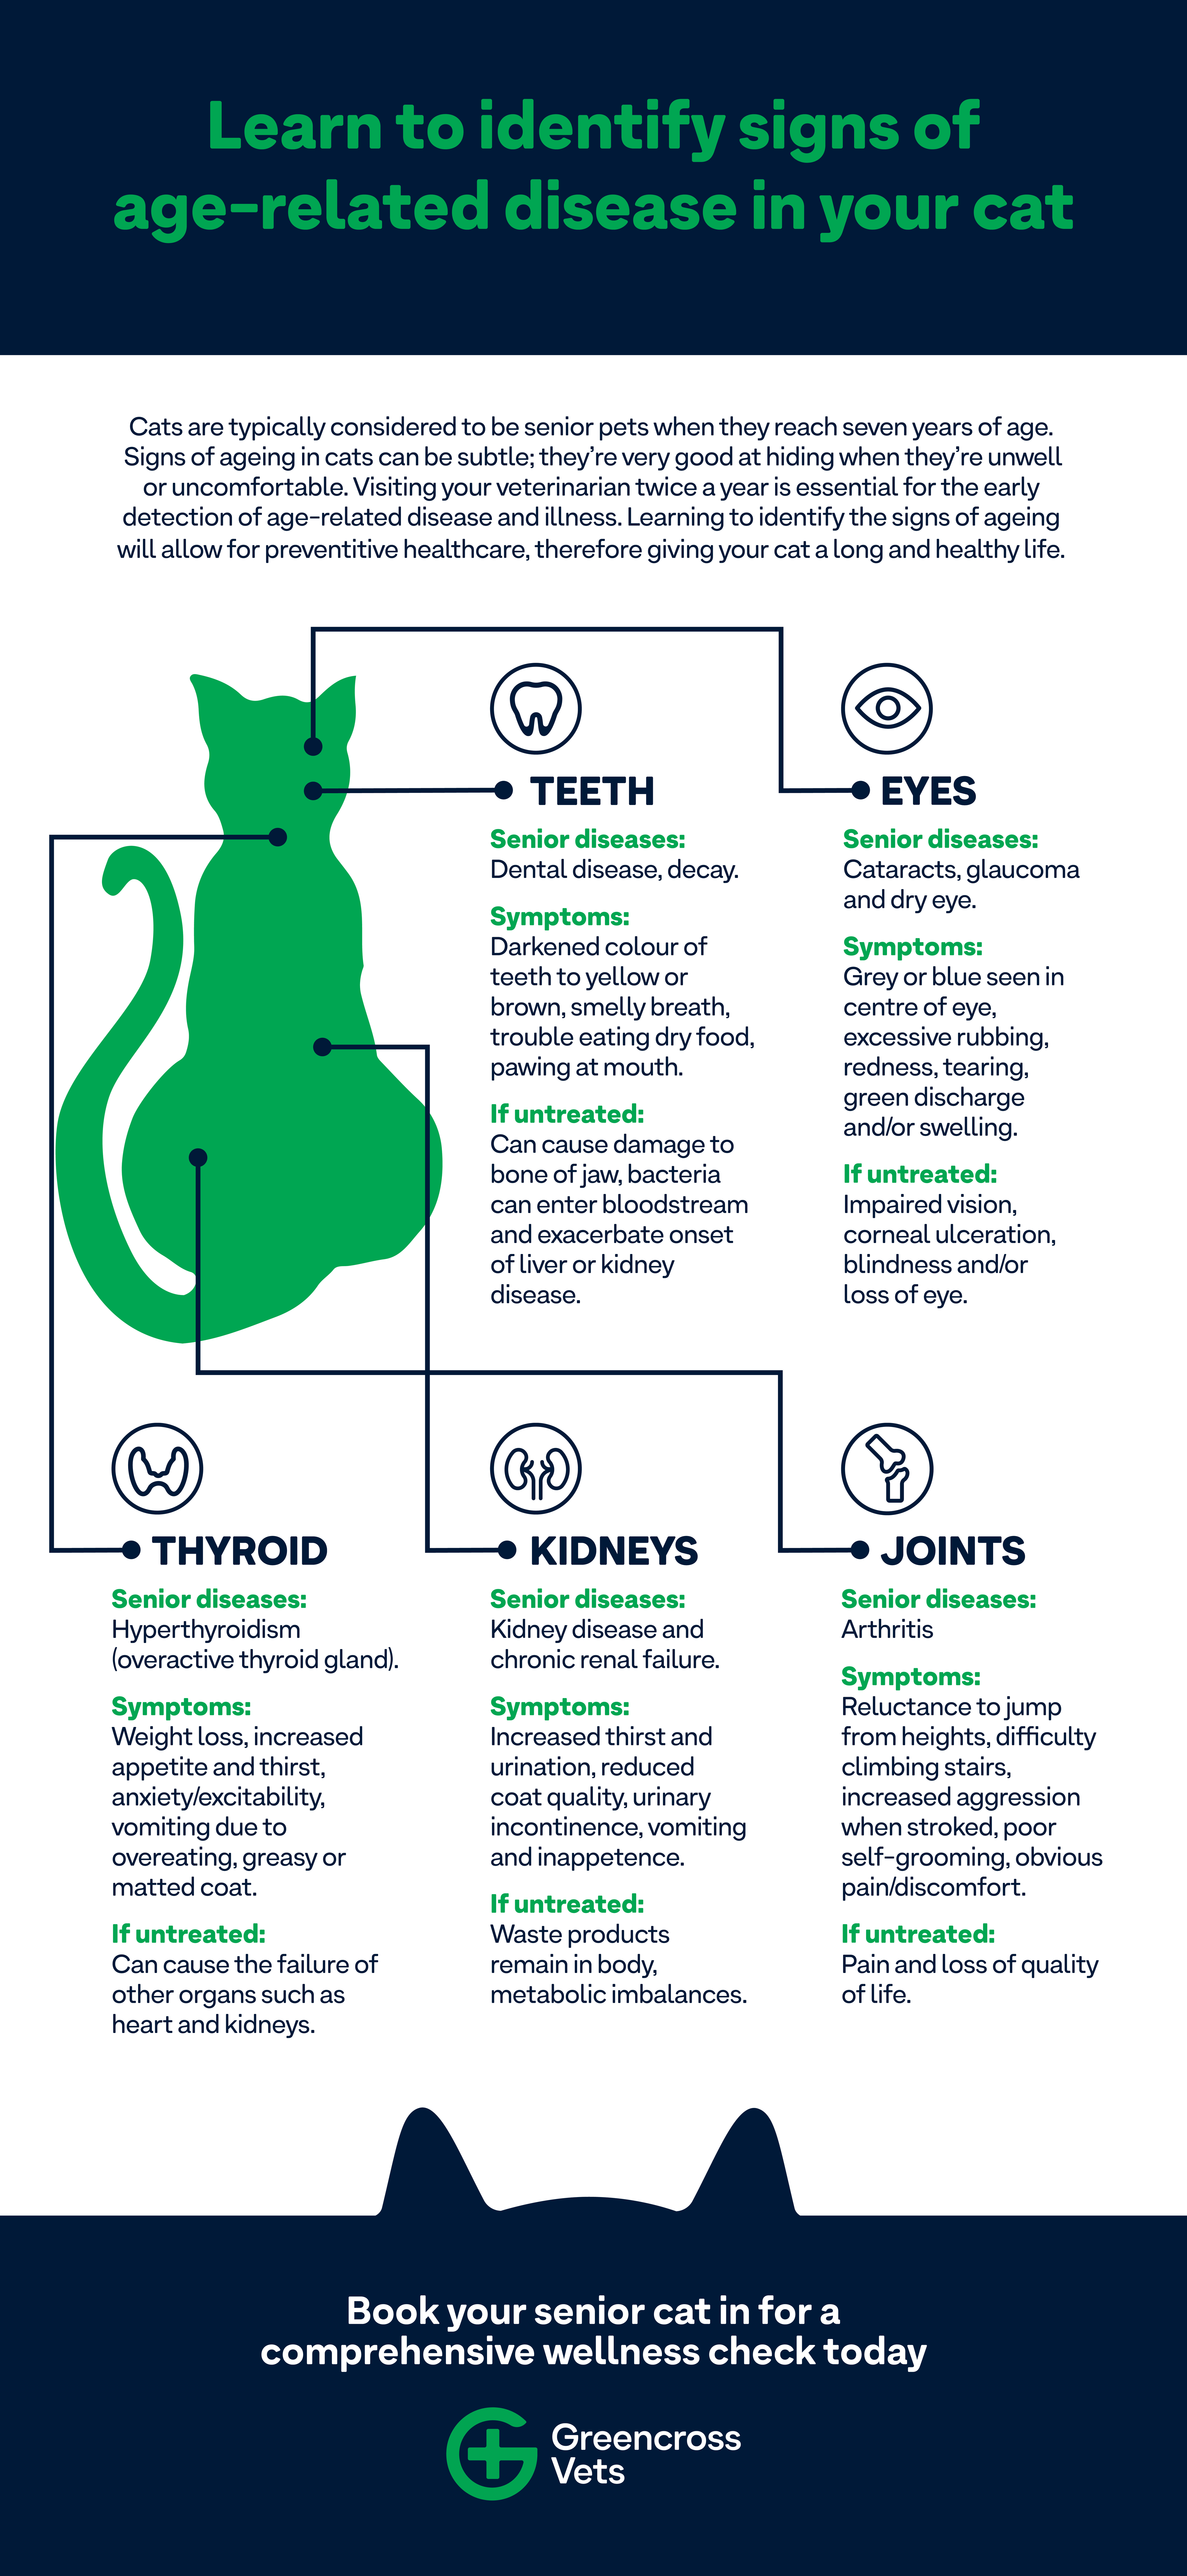 Infographic image listing detailing how to identify signs of age-related disease in your cat by looking at their different body parts